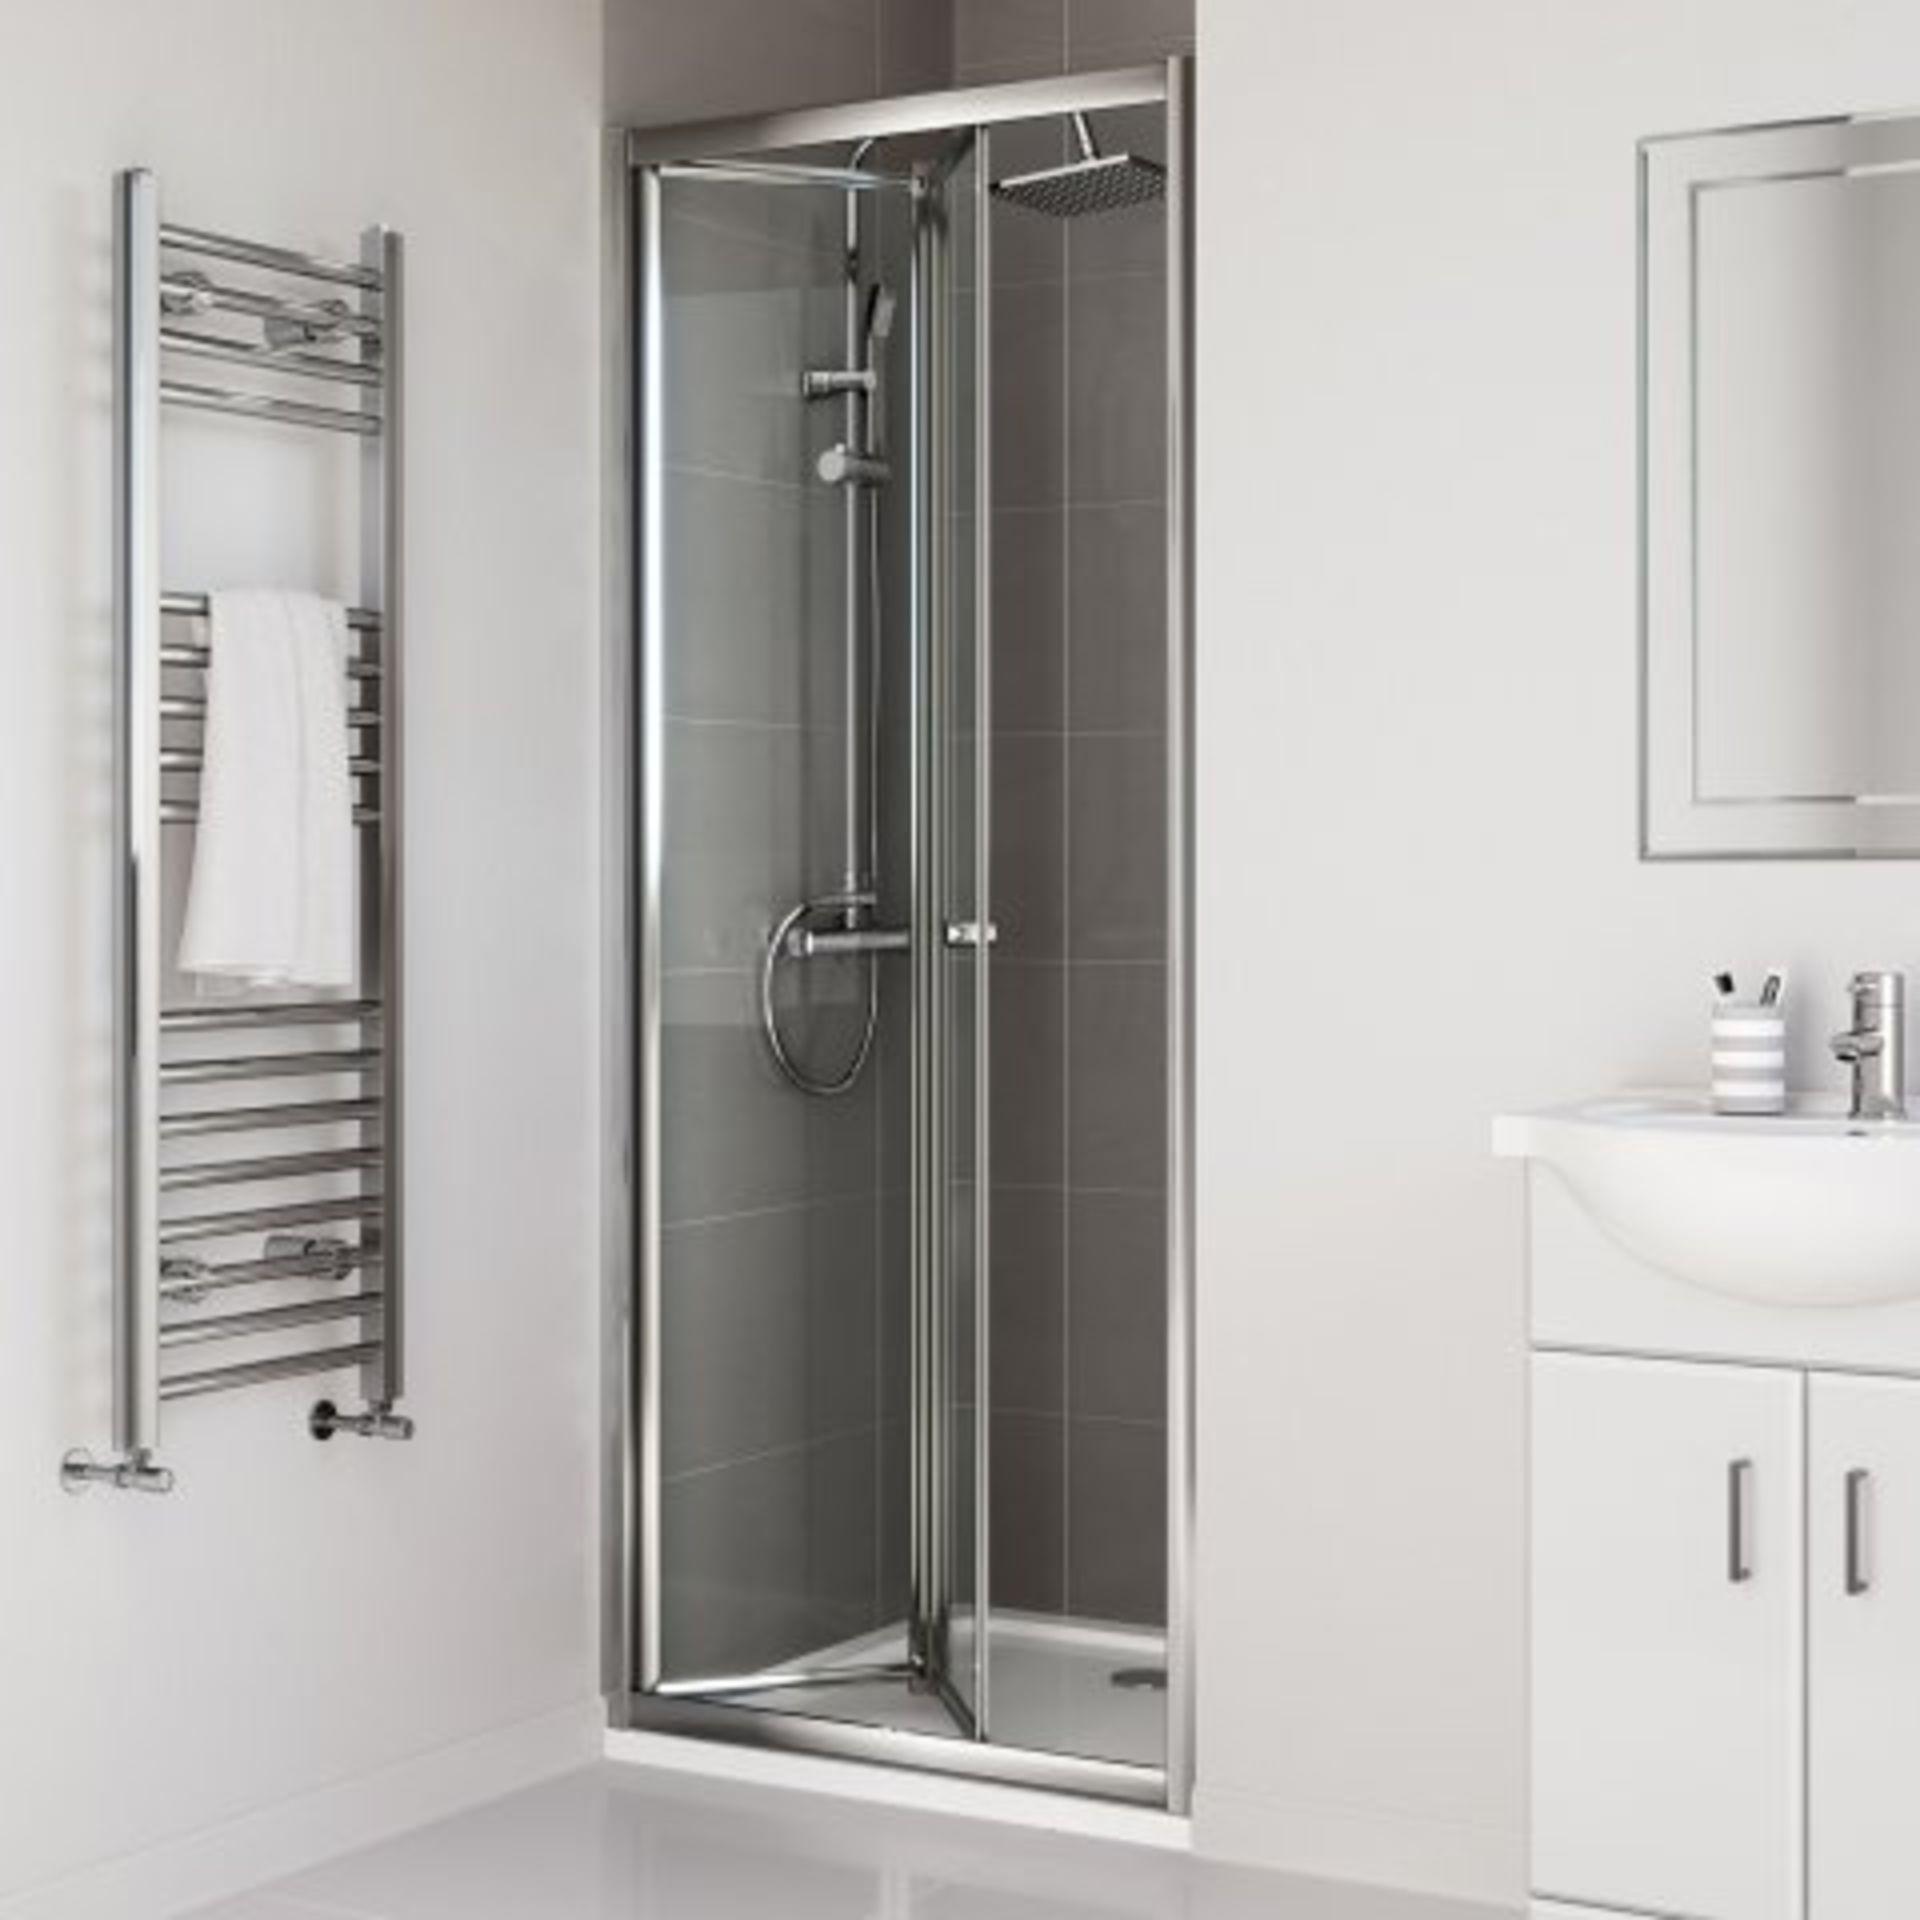 (I19) 760mm - Elements Bi Fold Shower Door RRP £299.99 Do you have an awkward nook or a tricky - Image 2 of 3